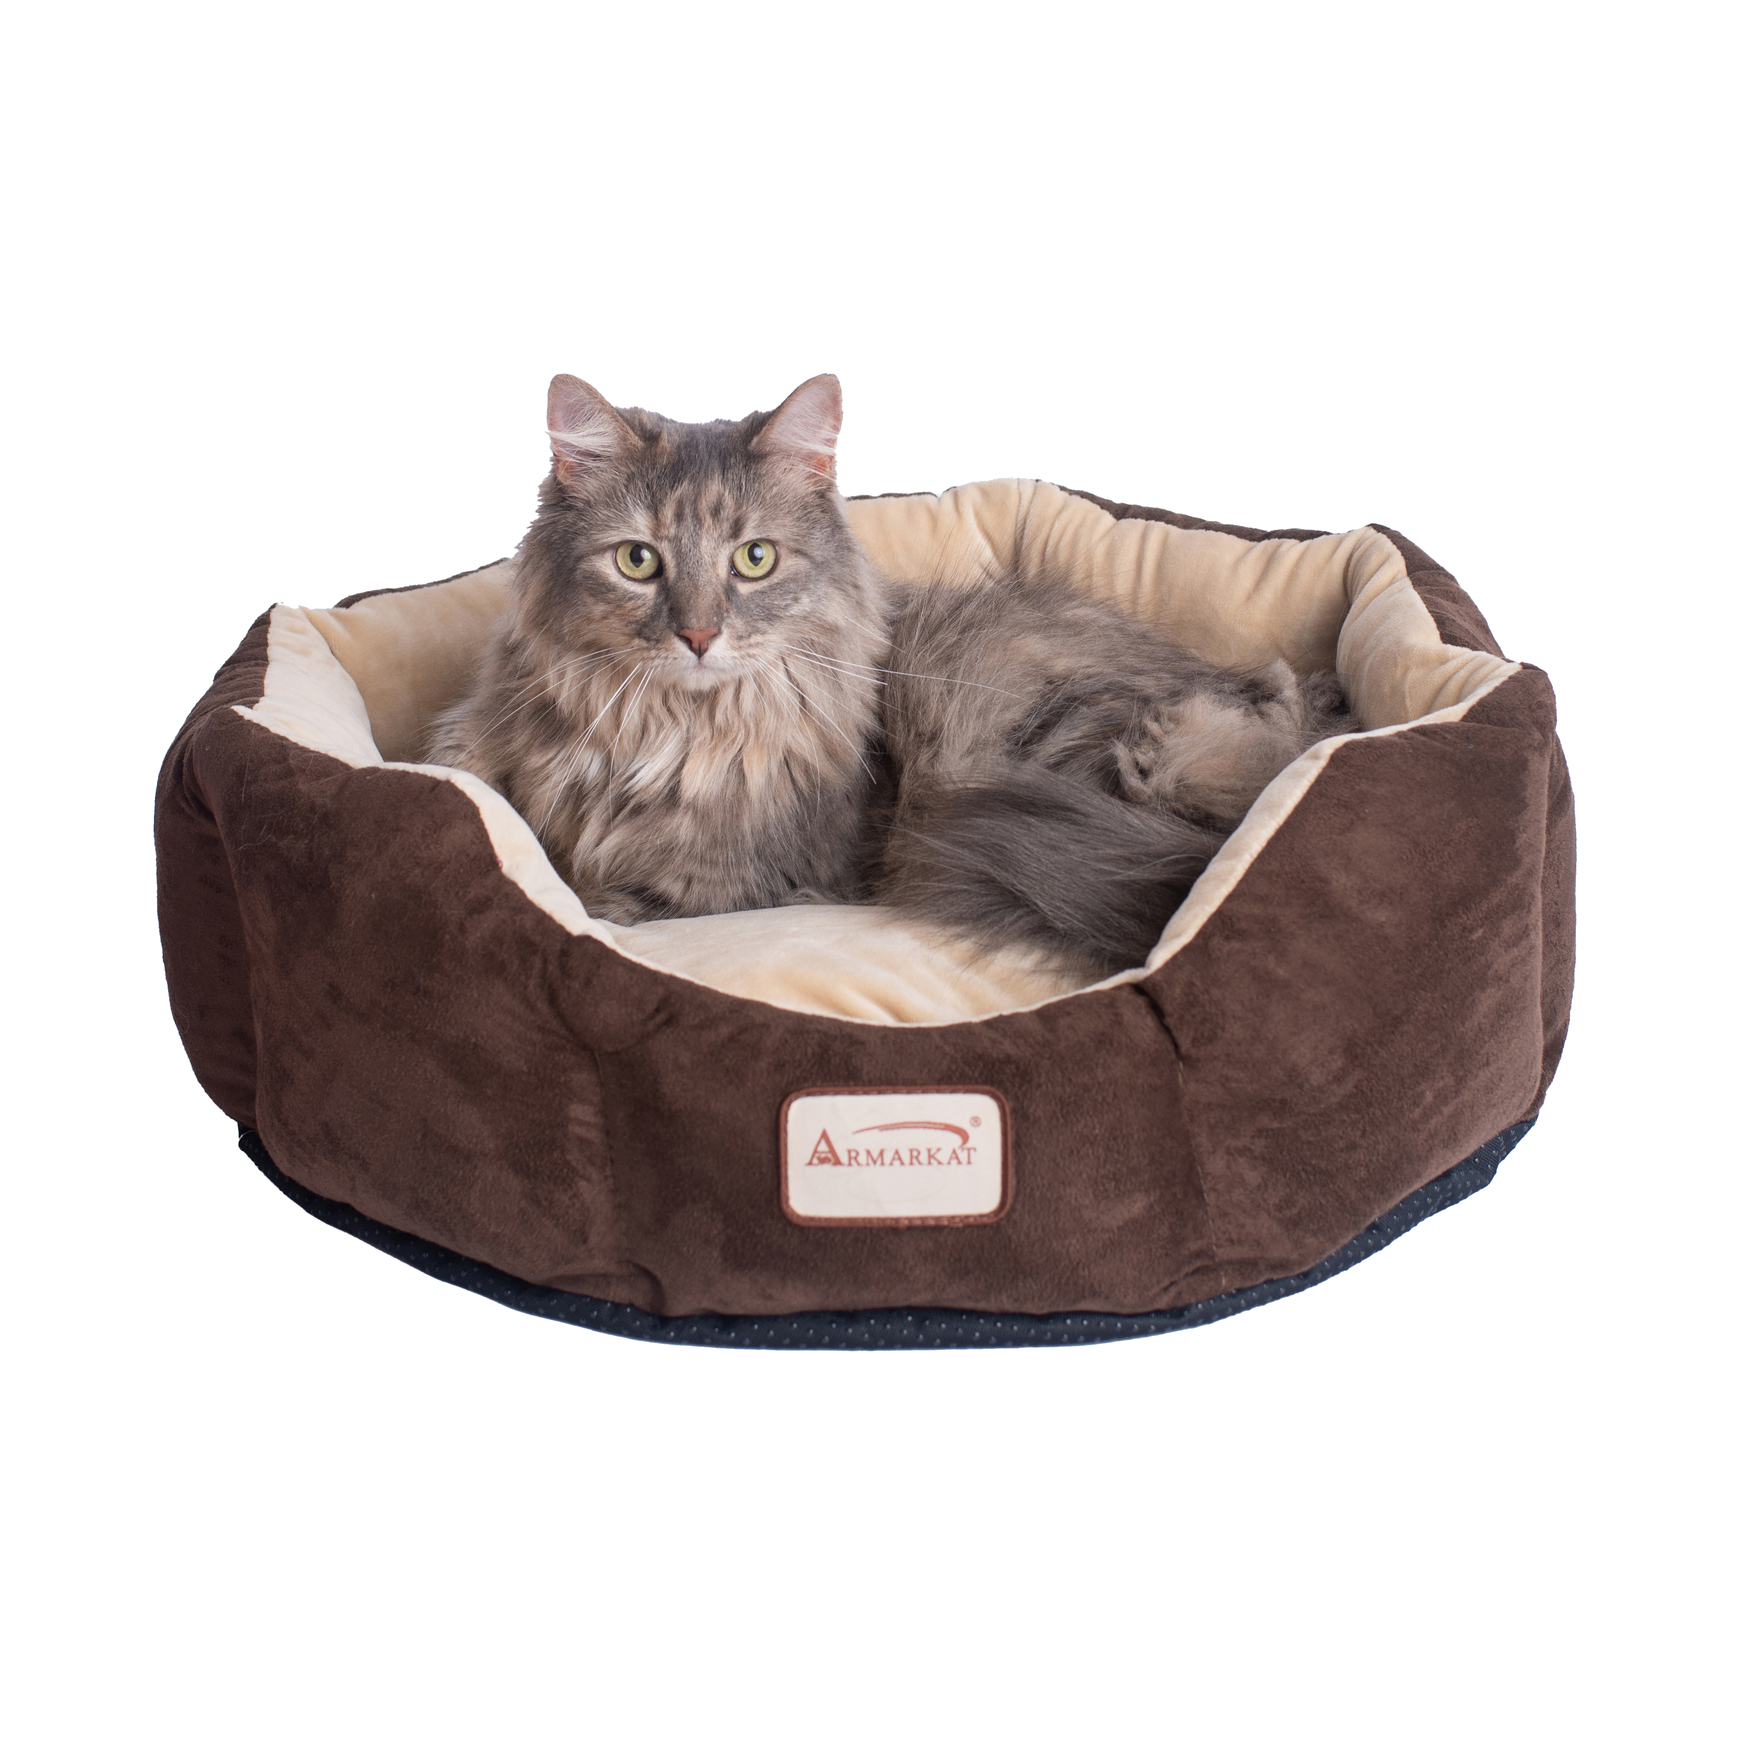 Cozy Pet Bed, Mocha/Beige For Cats And Extra Small Dogs, BEIGE MOCHA